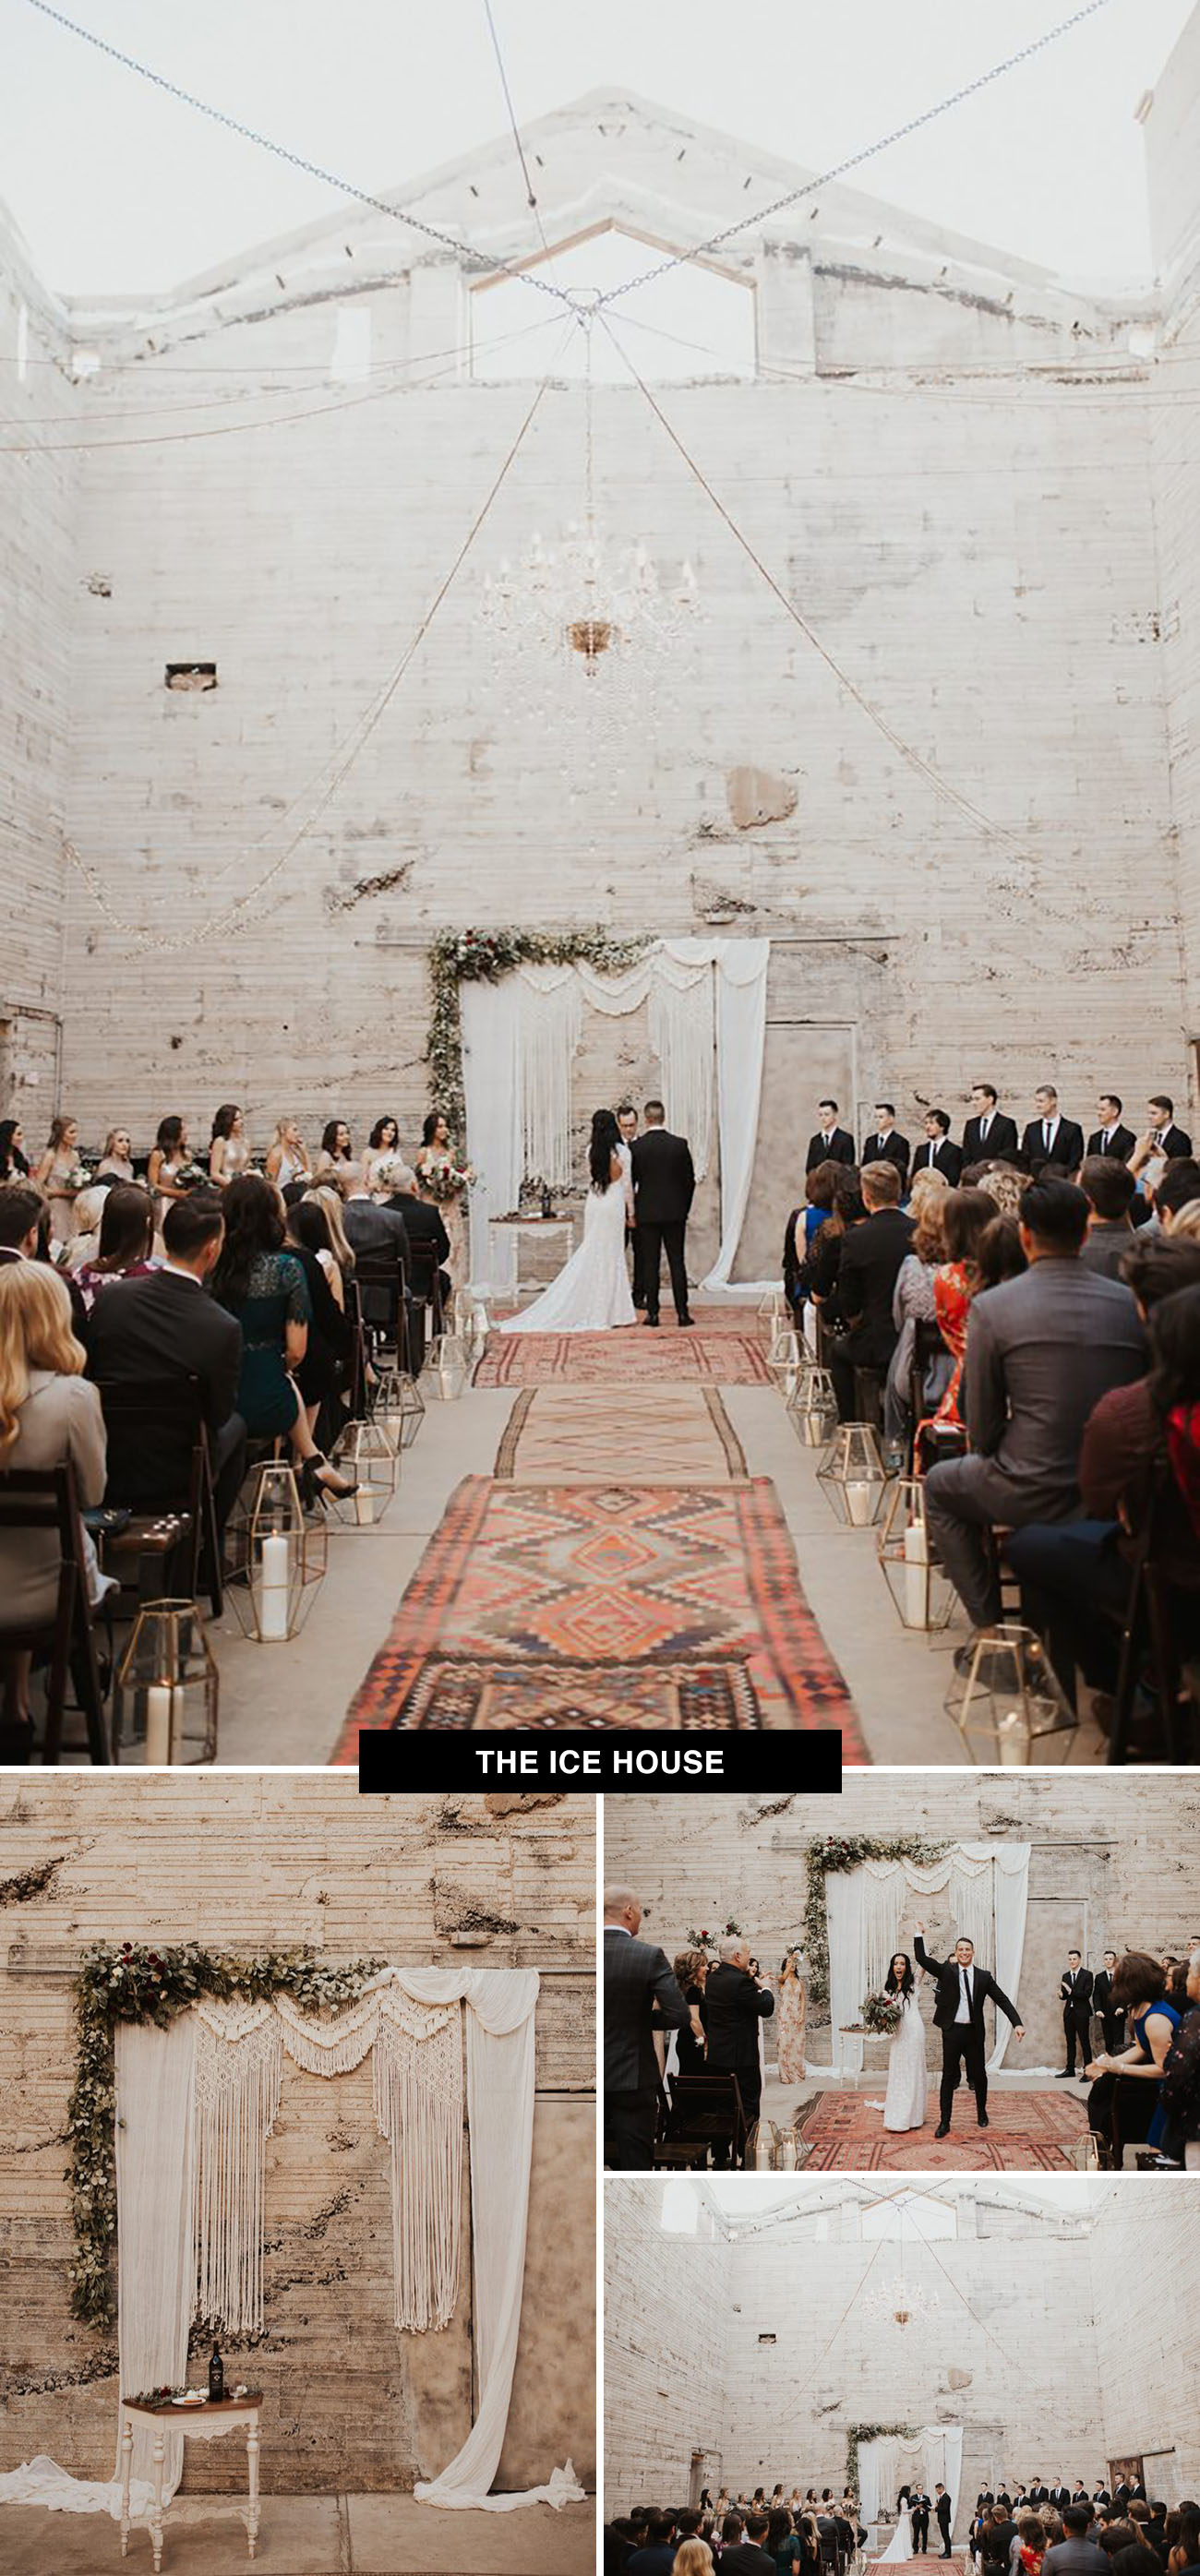 The Ice House wedding venue in Phoenix, Arizona is a cool place to get married